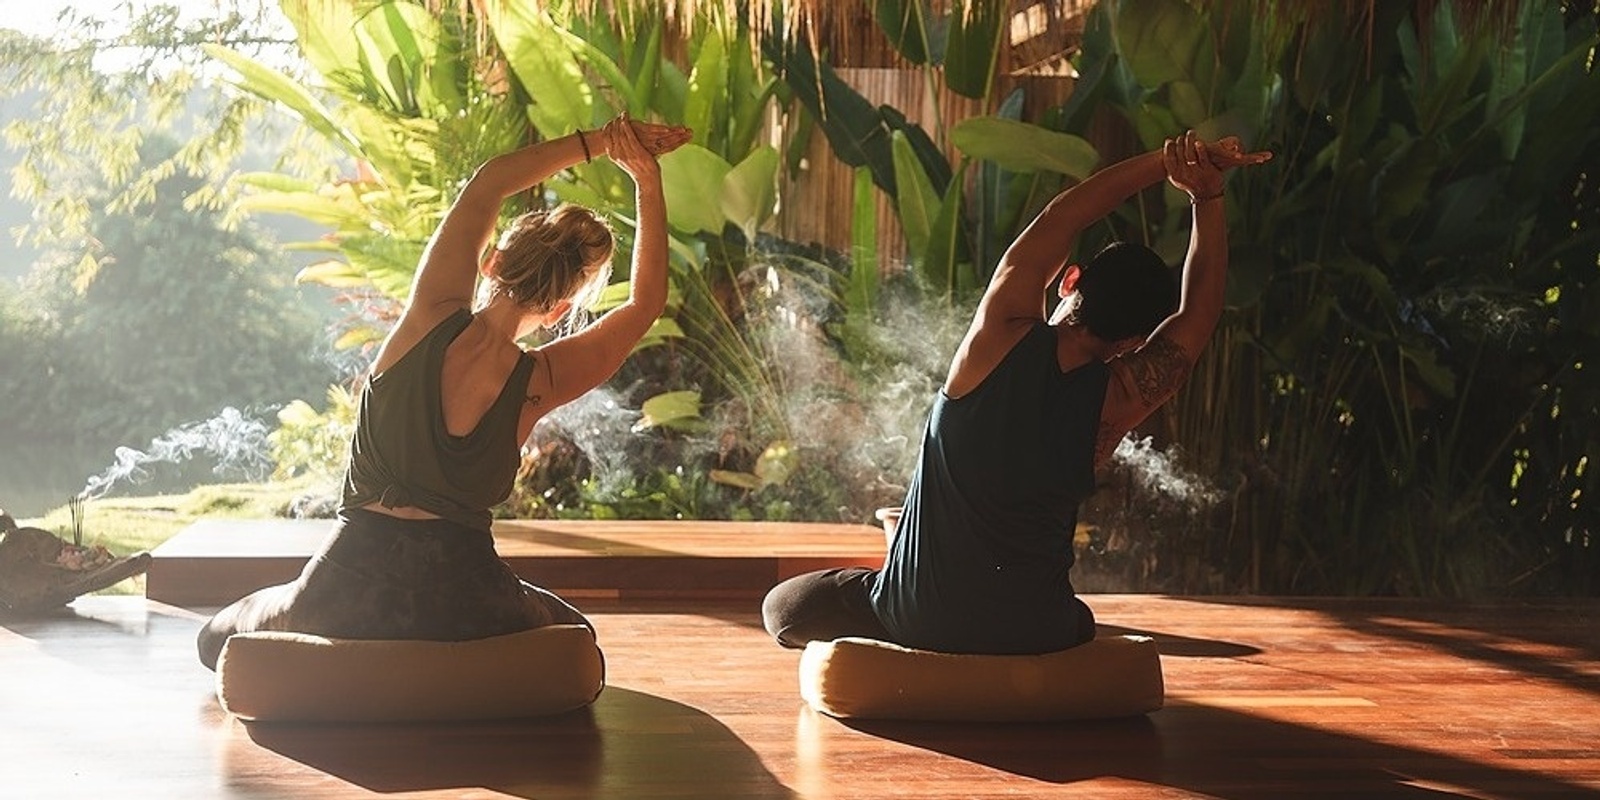 Banner image for Yoga & Balinese Culture Retreat with Nicky Sudianta, Balian Spirit Yoga